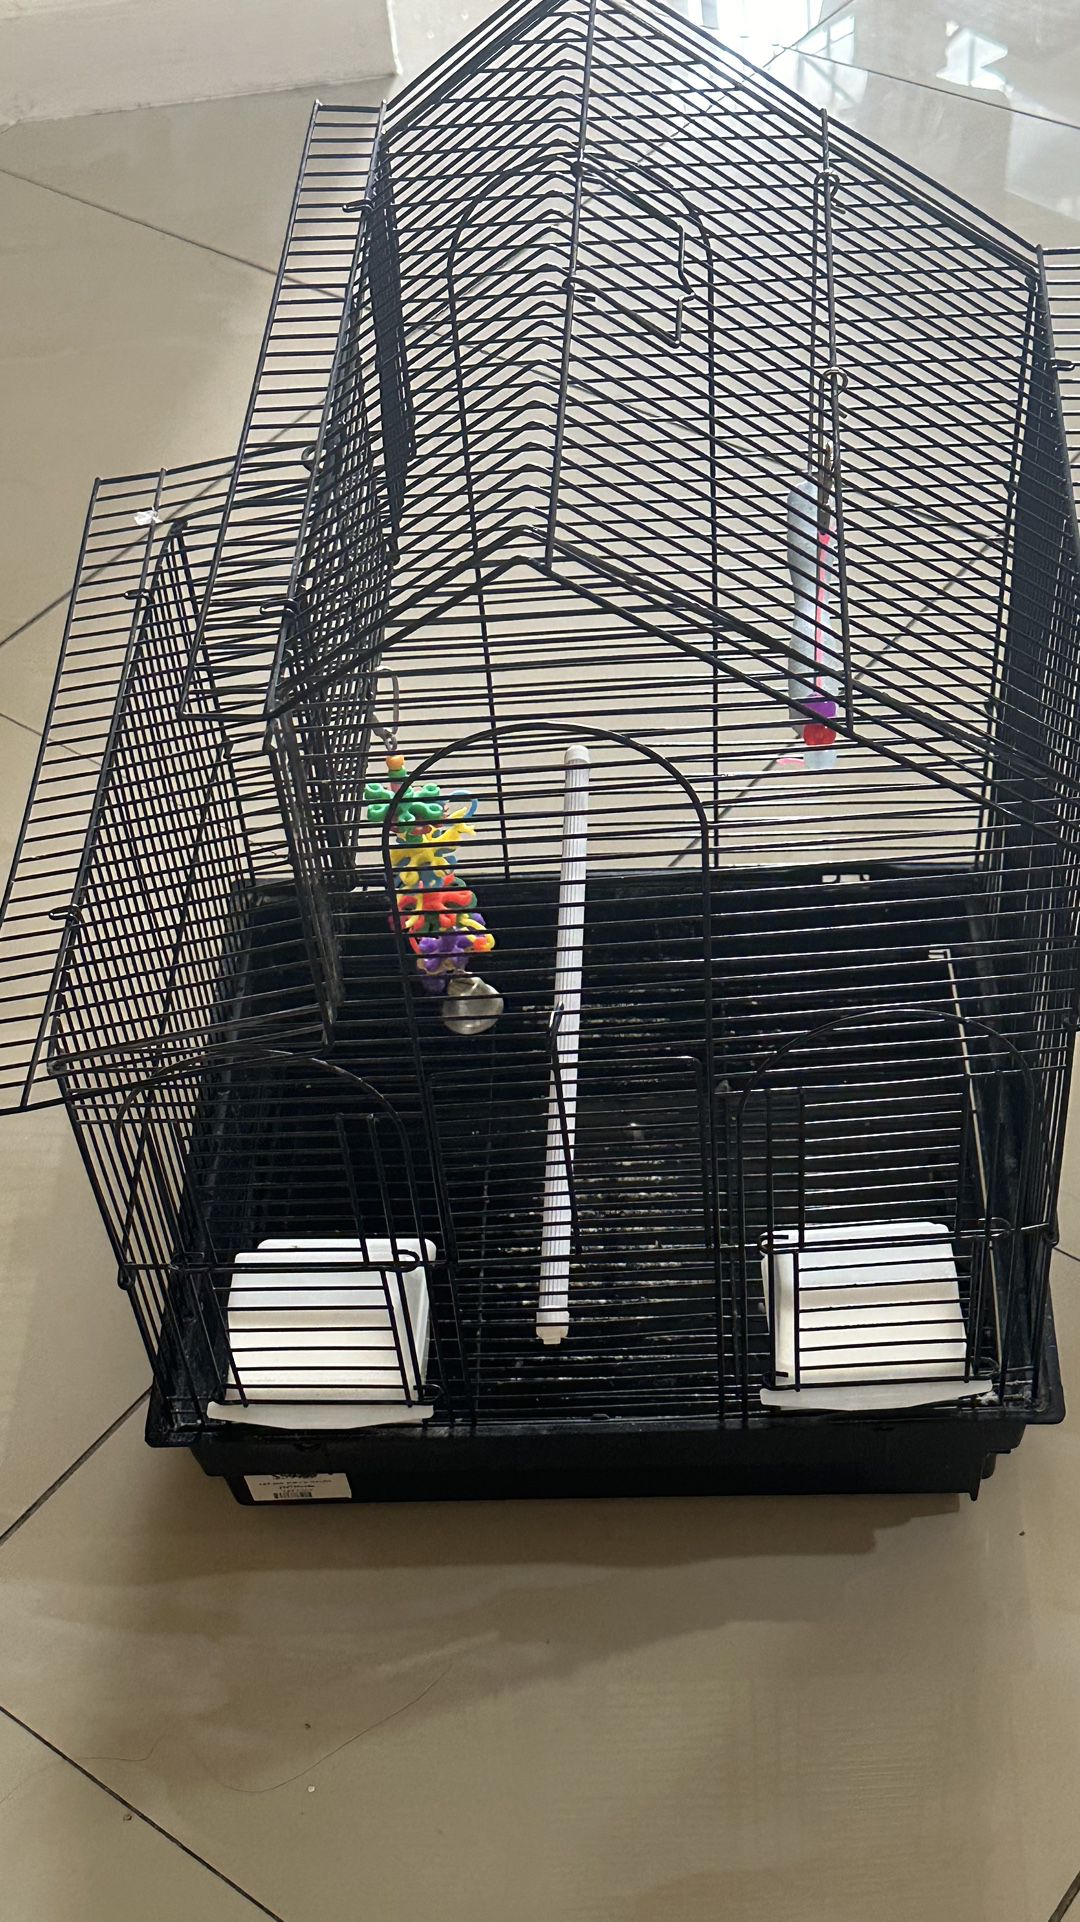 Bird Cage with toys ($40.00)